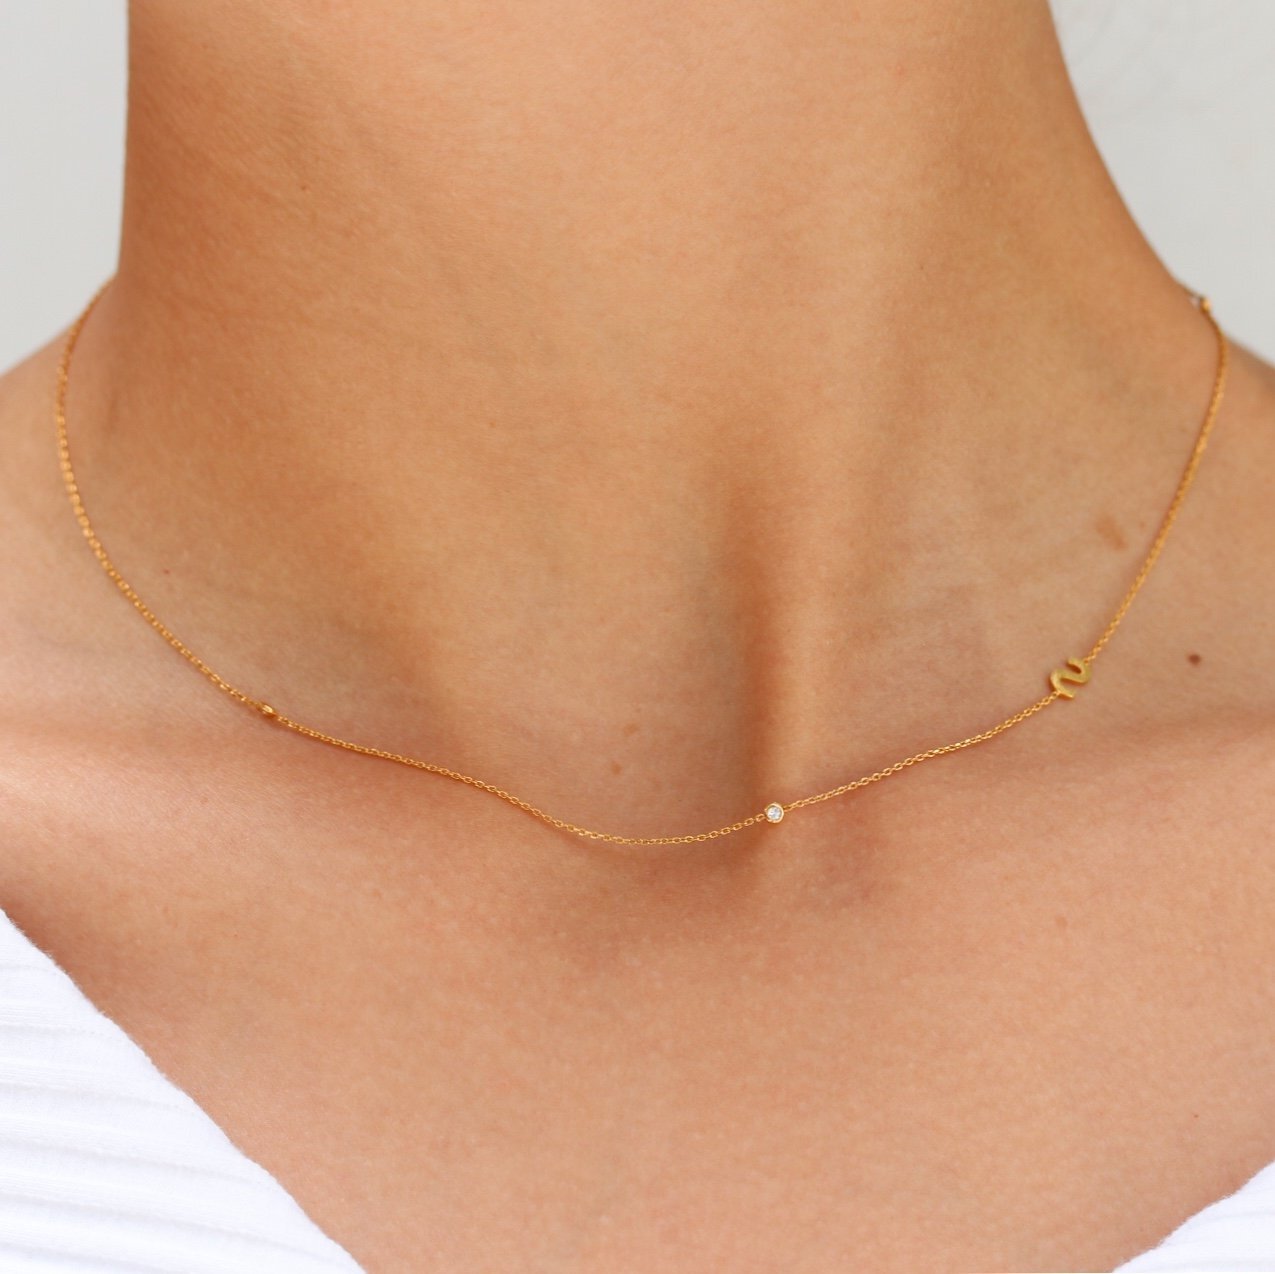 stylish gold-plated necklace with cubic zirconia accents